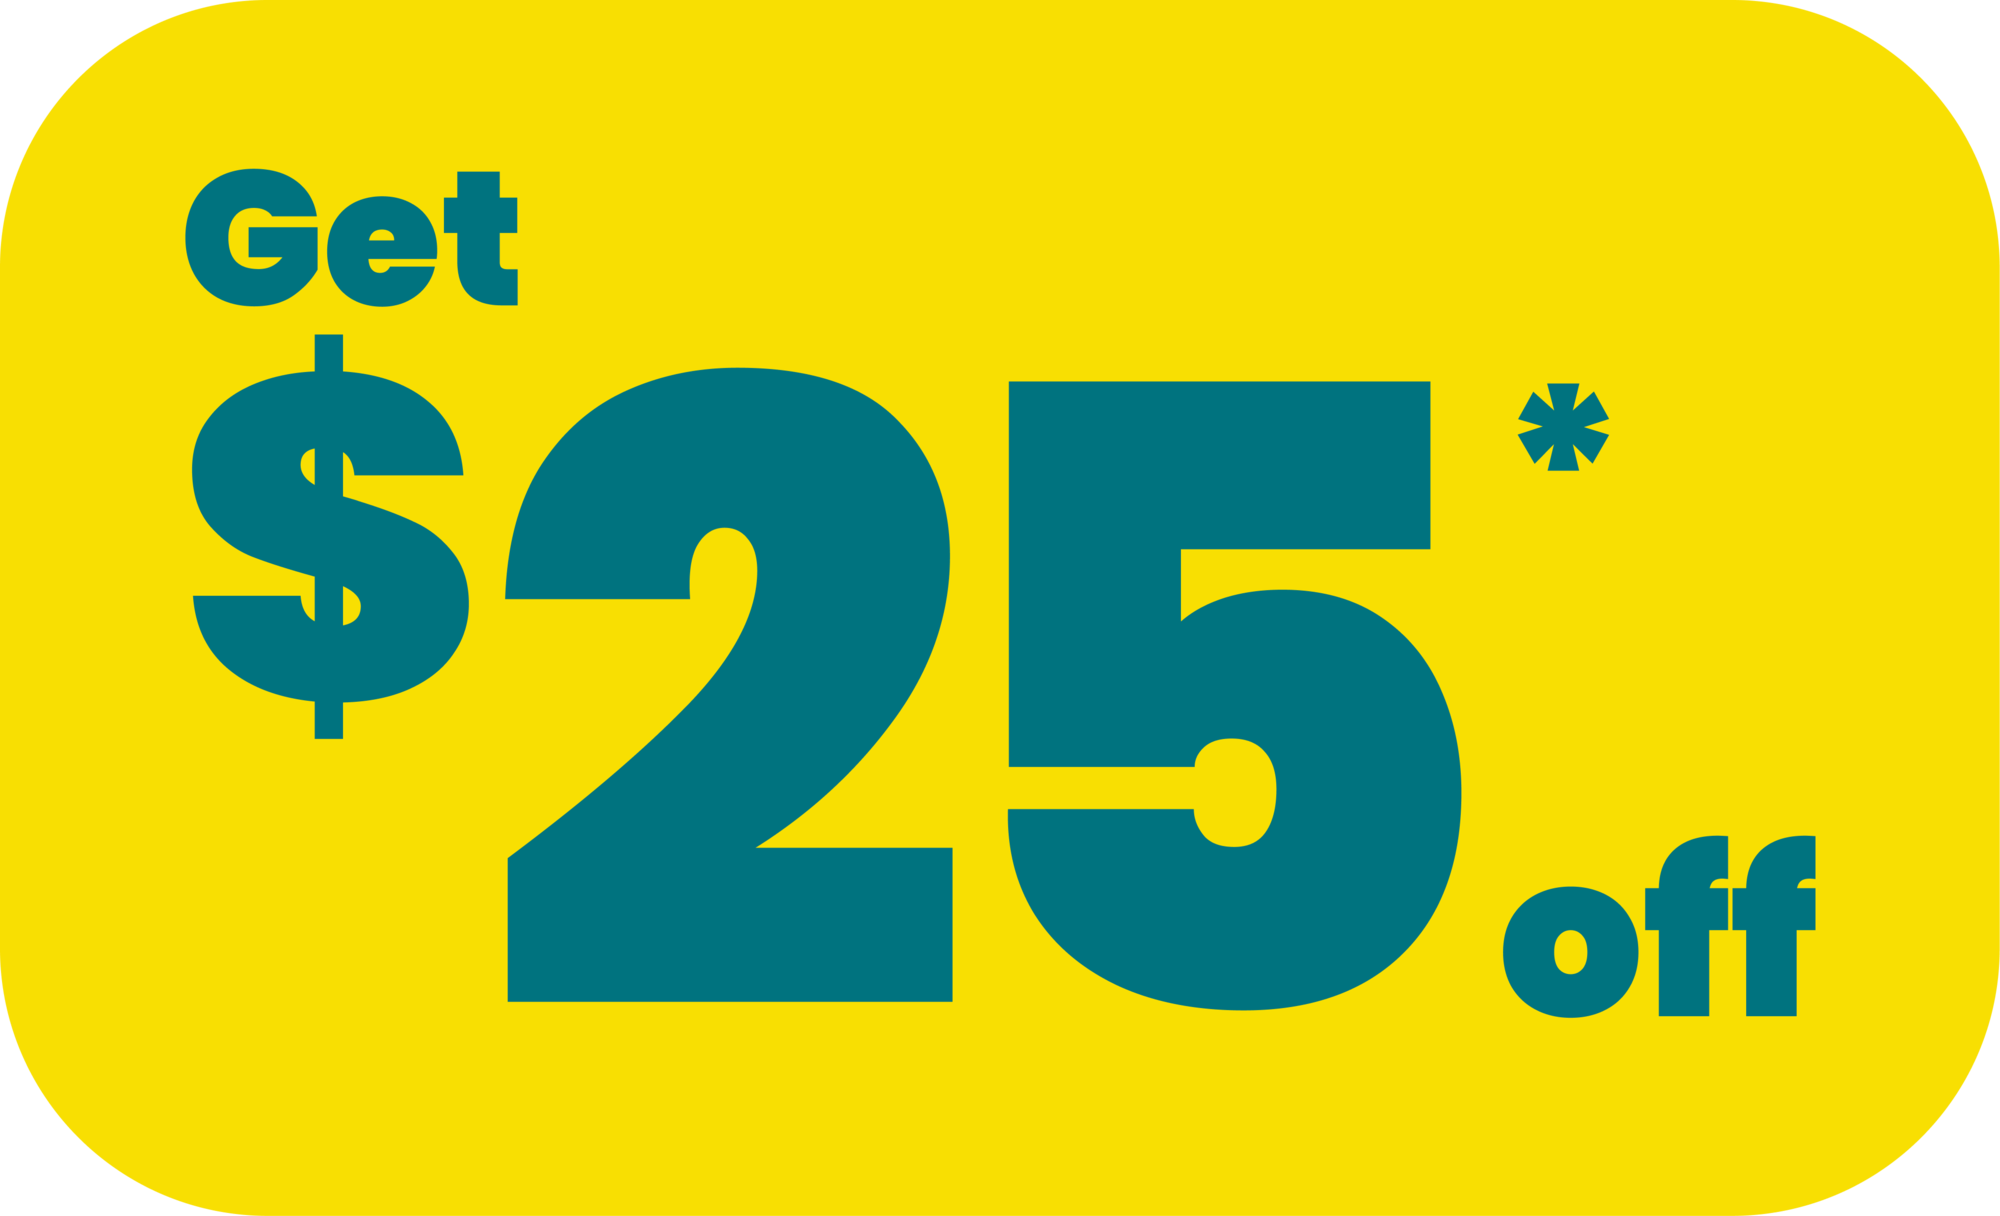 Yellow and Blue banner reading Get $25 off